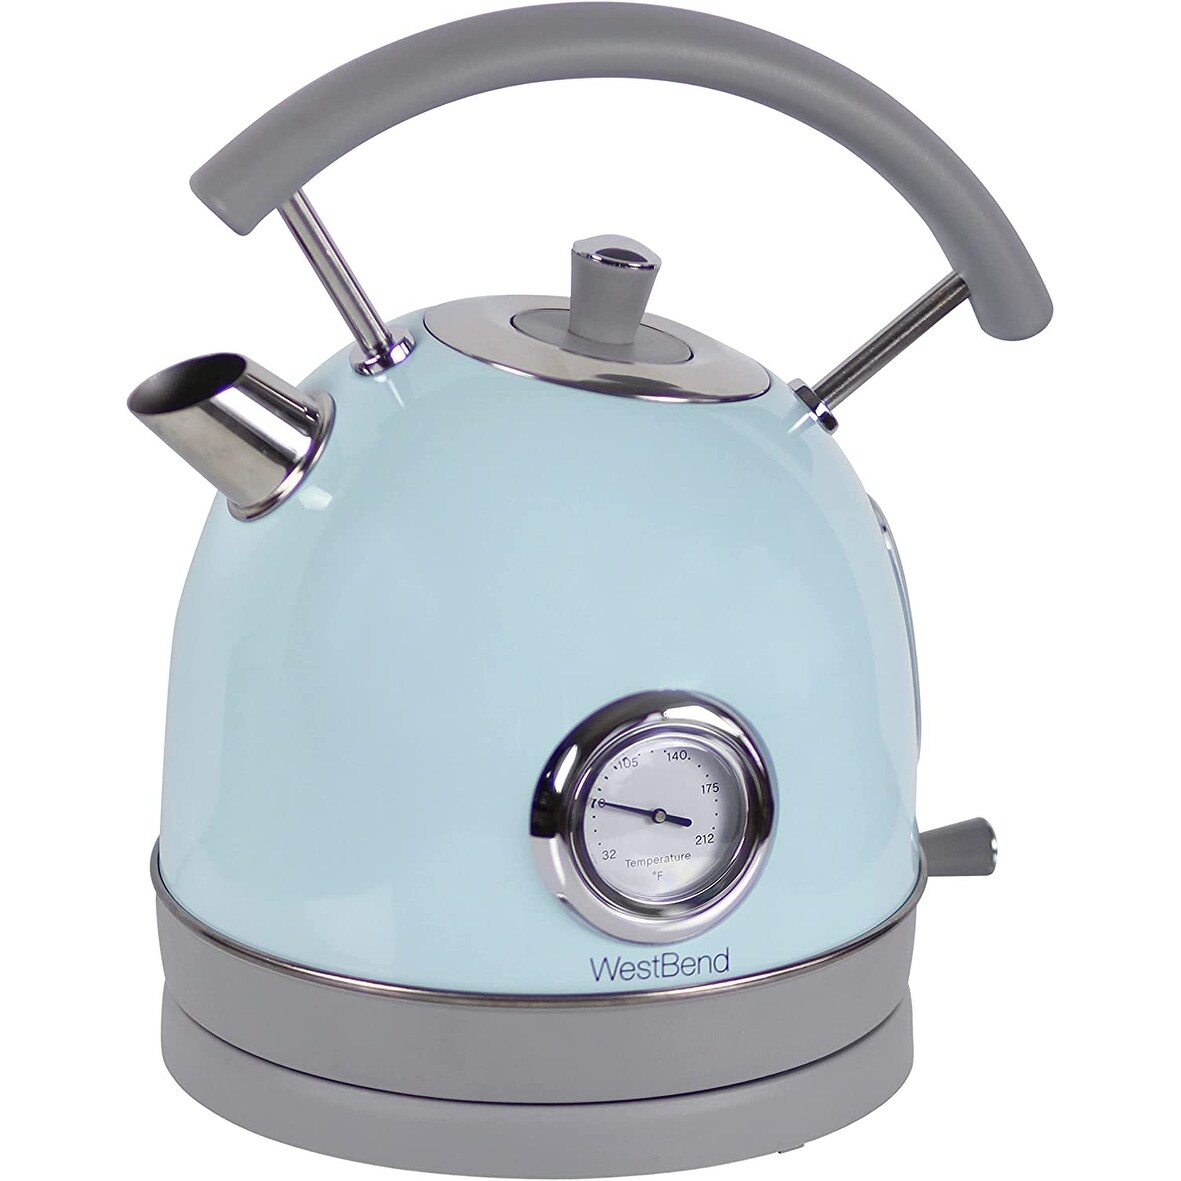 https://ak1.ostkcdn.com/images/products/is/images/direct/c516b1ea4eaf12a0f1f9a3fd3579f2987ea2217a/West-Bend-Electric-Kettle-Retro-Styled-Stainless-Steel-1500-Watts-with-Auto-Shutoff-%26-Boil-Dry-Protection%2C-1.7-Liter%2C-Blue.jpg